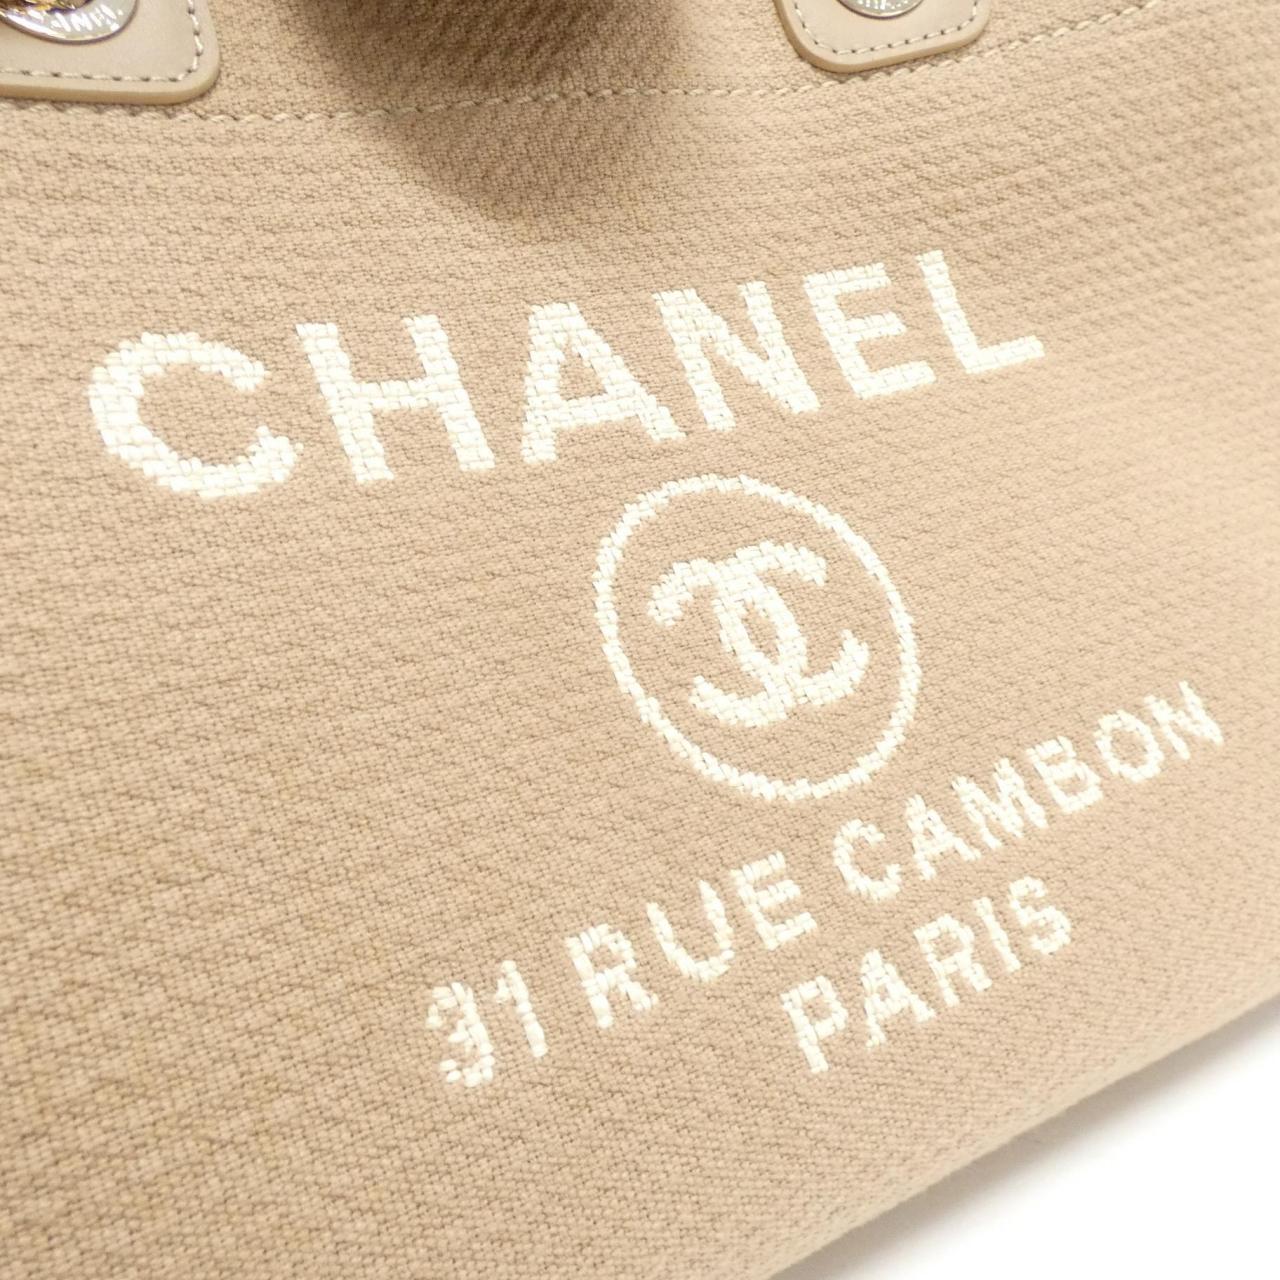 CHANEL Deauville Line AS3257 Bag